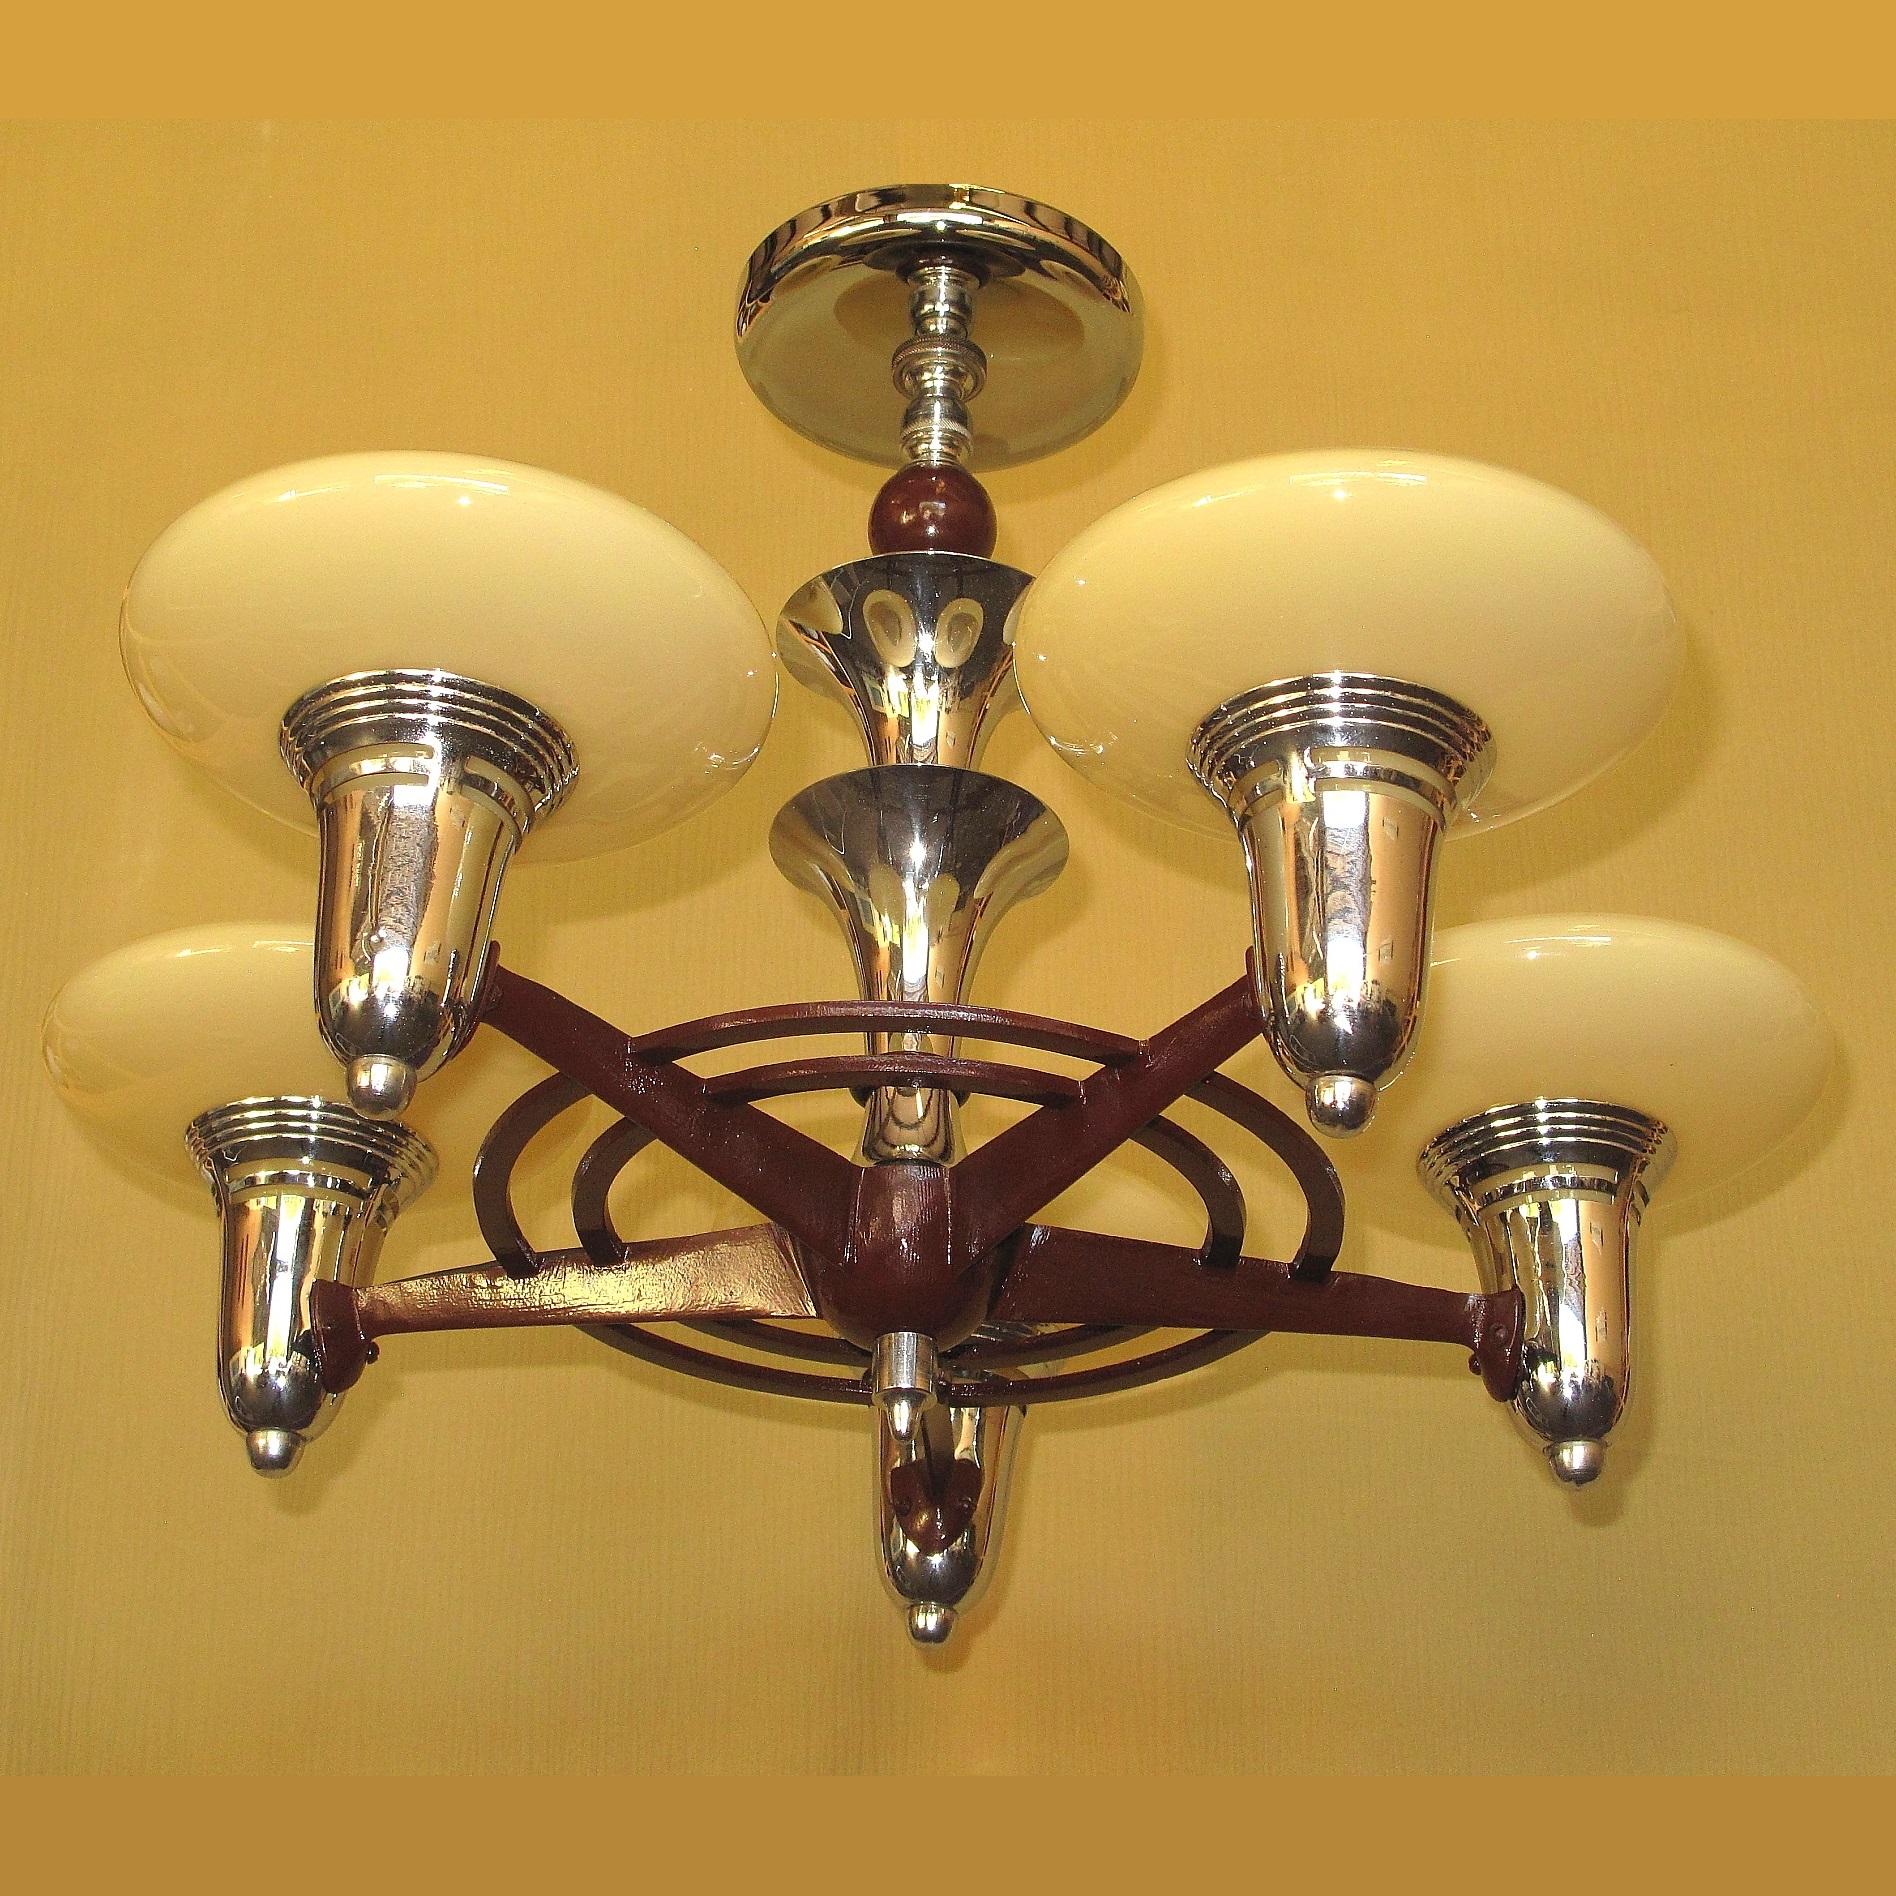 This cast iron and chrome fixture shows the distinct direction design & style was taking in the 1930s, moving from Art Deco to what we now call Mid-Century Modern, strong clean lines without the ornamentation common in the Art Deco era.
The chrome